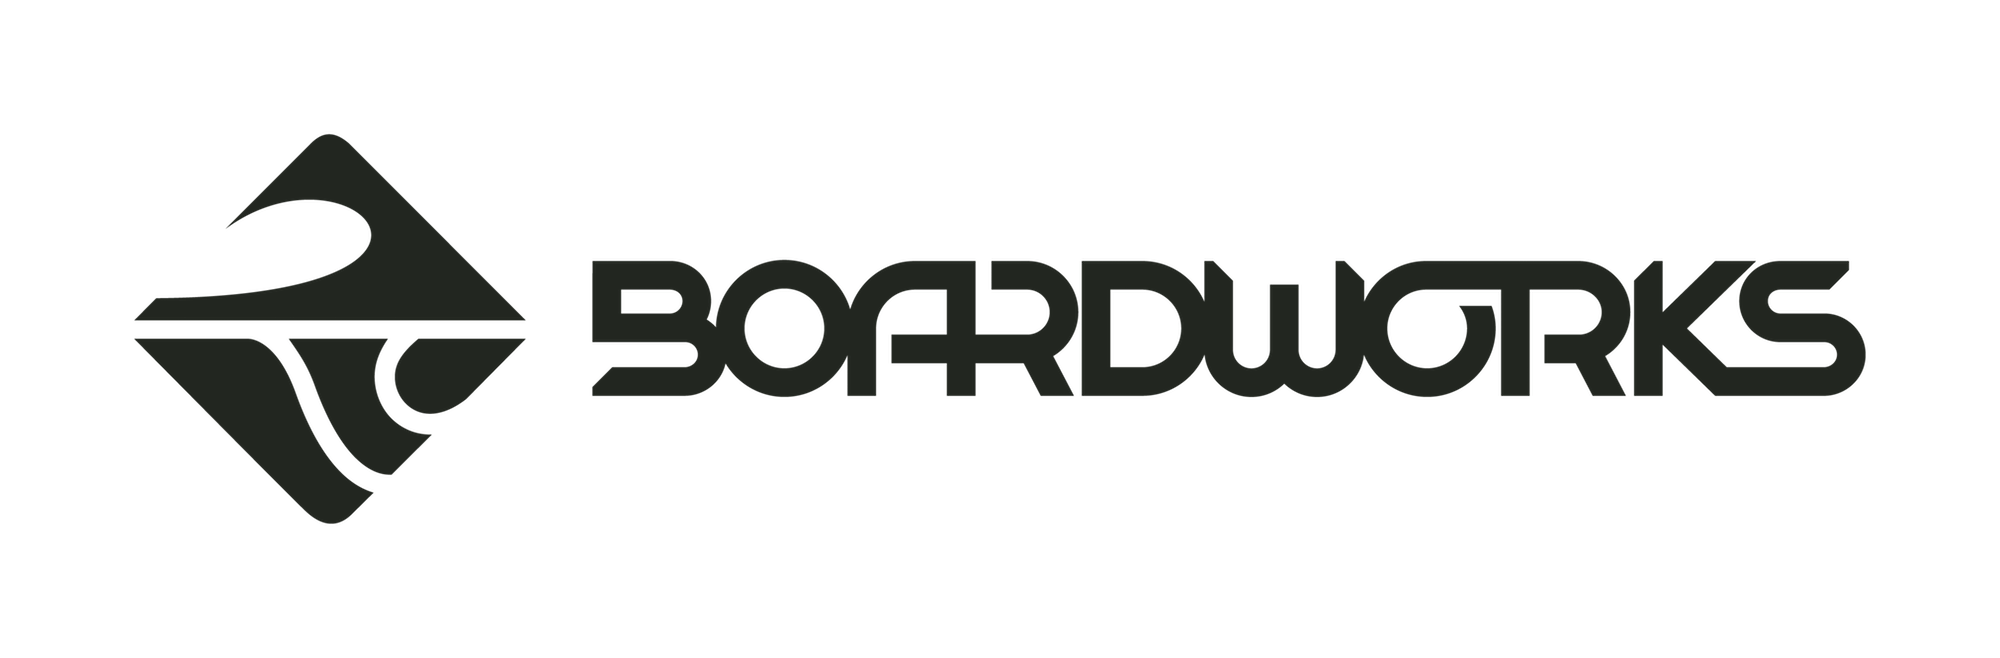 Boardworks Surf Acquires Global License Agreement to Rogue SUP and Surf ...